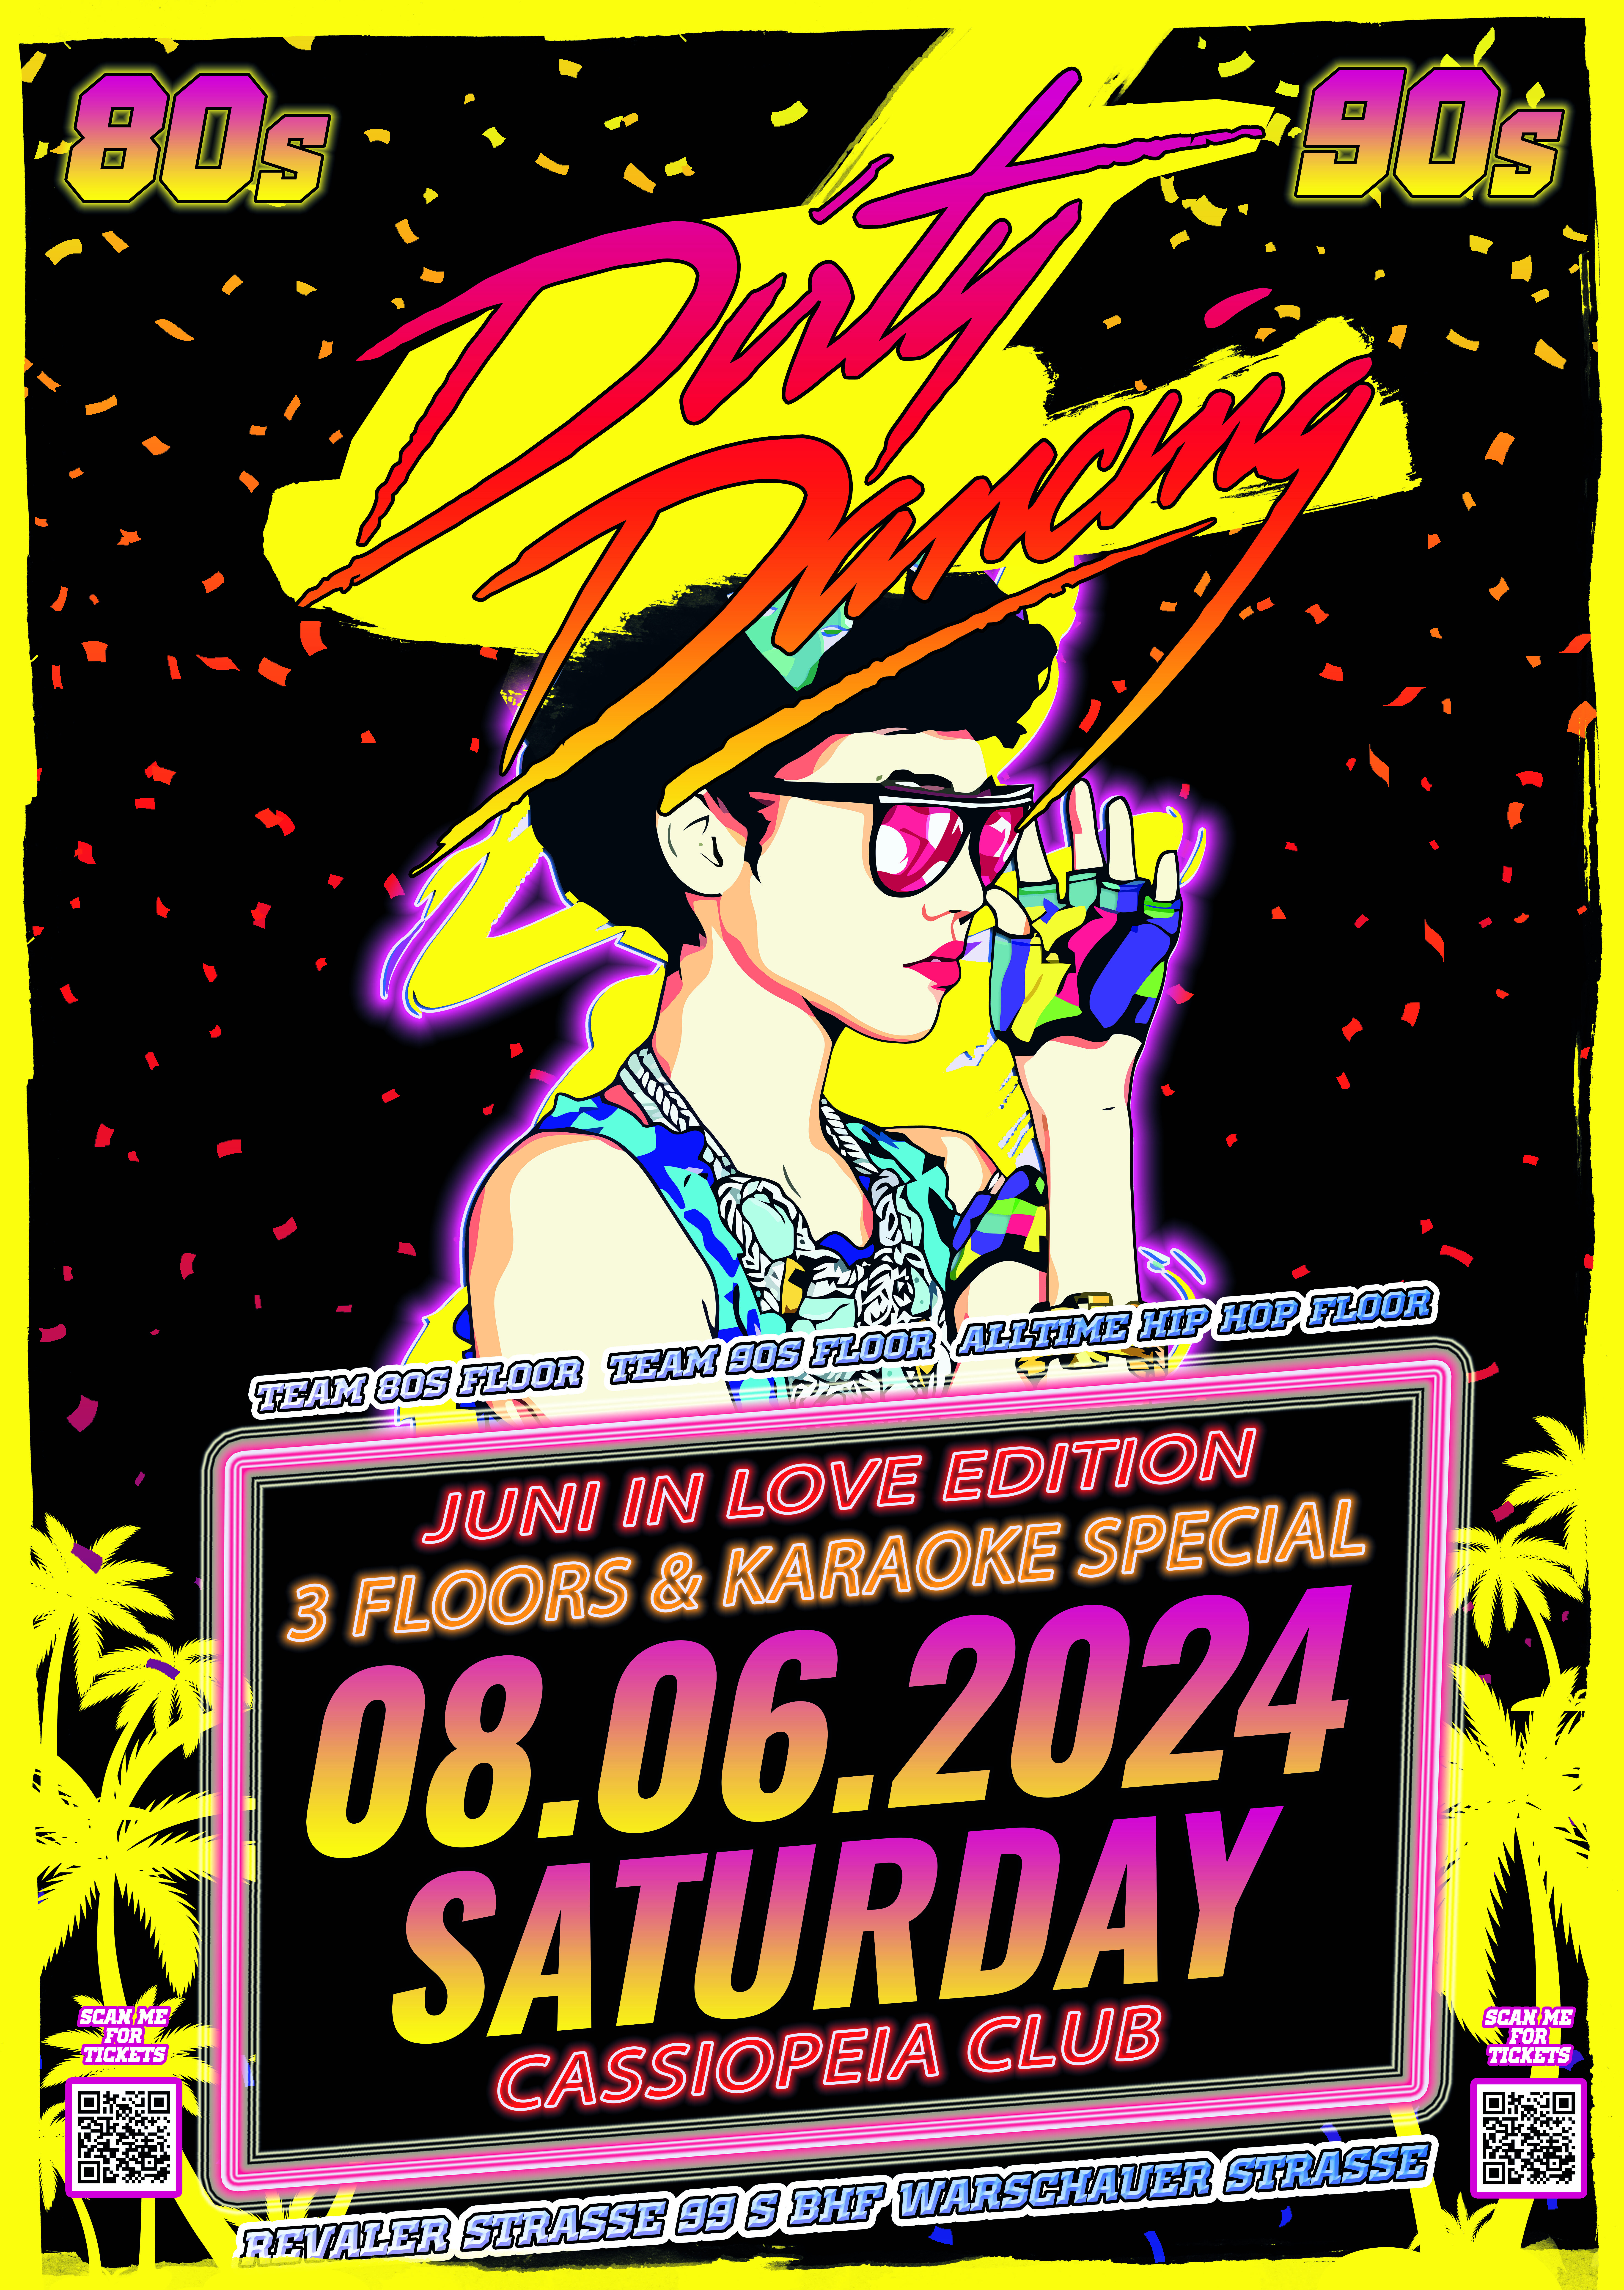 Cassiopeia 08.06.2024 Dirty Dancing Party - 80s & 90s Love - 3 Floors, Karaoke Special und Outdoor Area